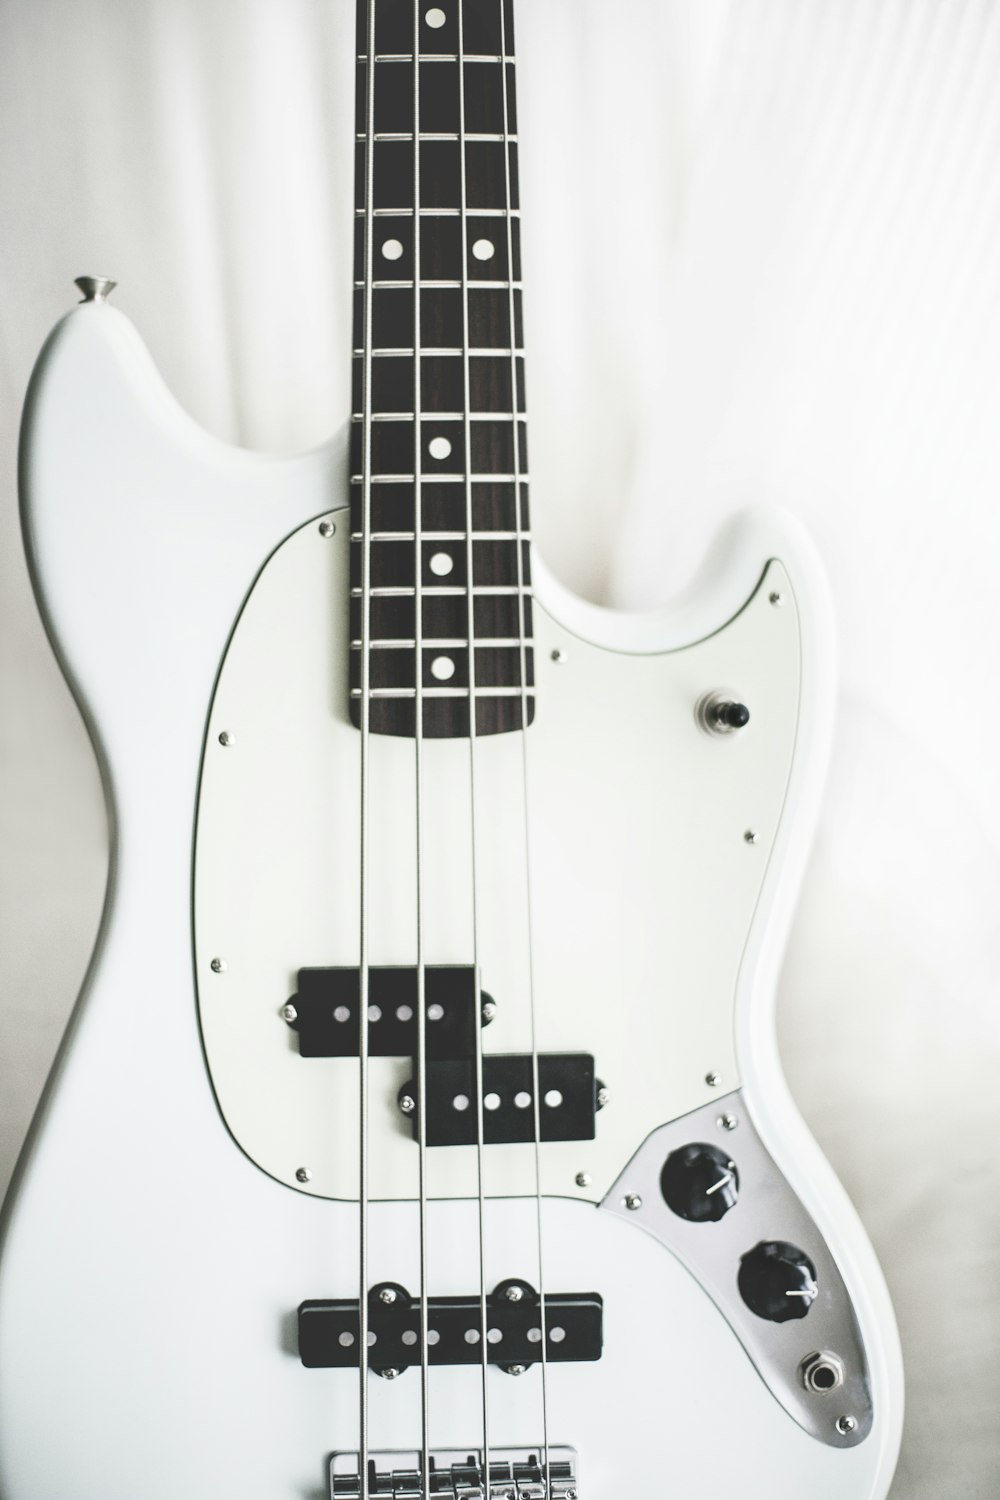 white and black electric bass guitar on white surface